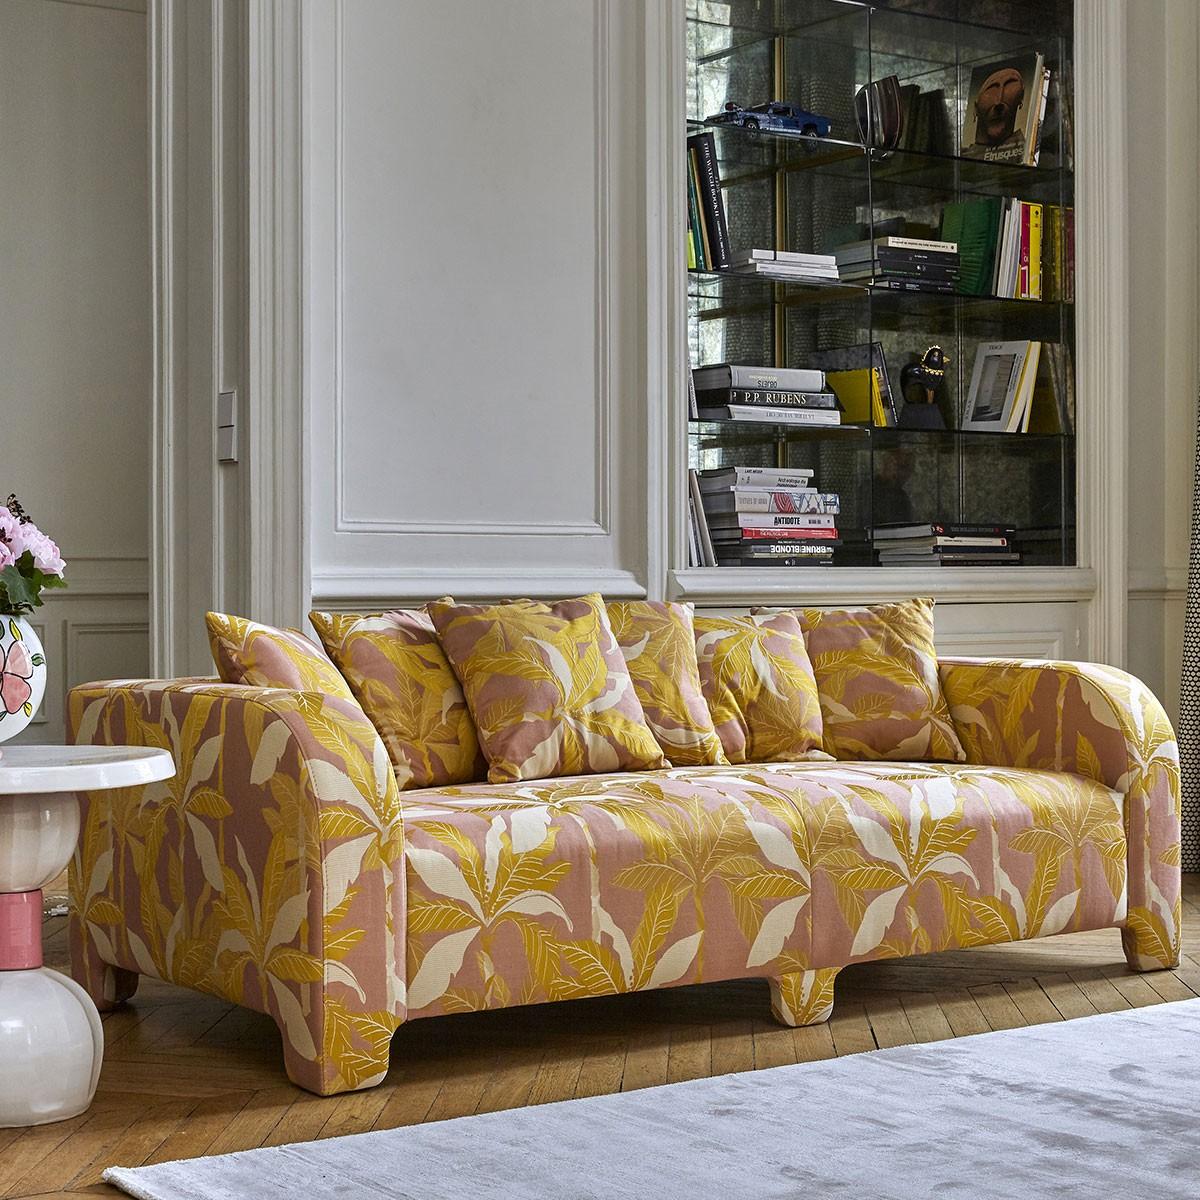 Popus editions Graziella 2 seater sofa in pink megeve fabric knit effect.

A foot that hides another. A cushion that hides another. A curve that hides another with contemporary lines and a base like a punctuation mark, this sofa gives pride of